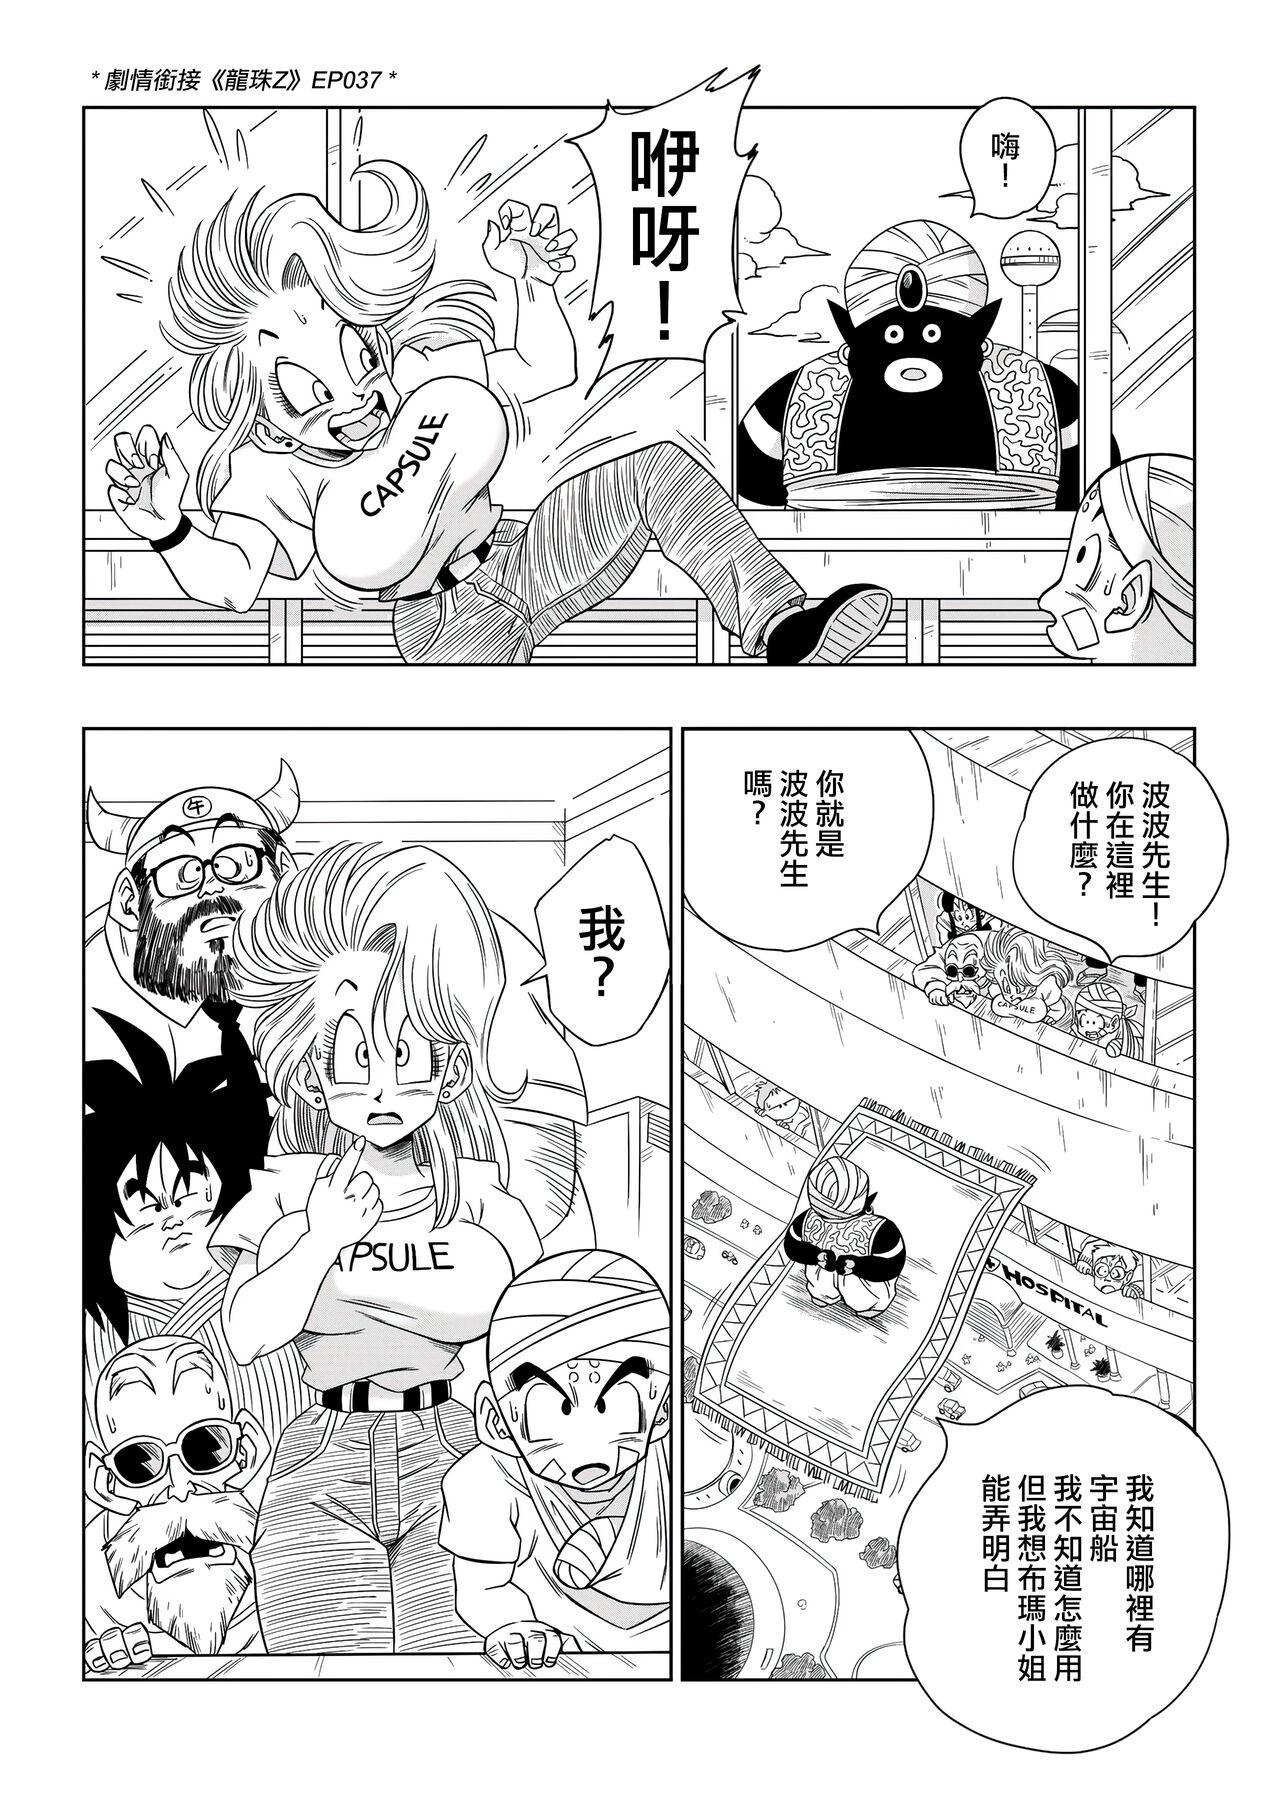 Cameltoe Bulma Meets Mr.Popo - Sex inside the Mysterious Spaceship! - Dragon ball z Daring - Page 3